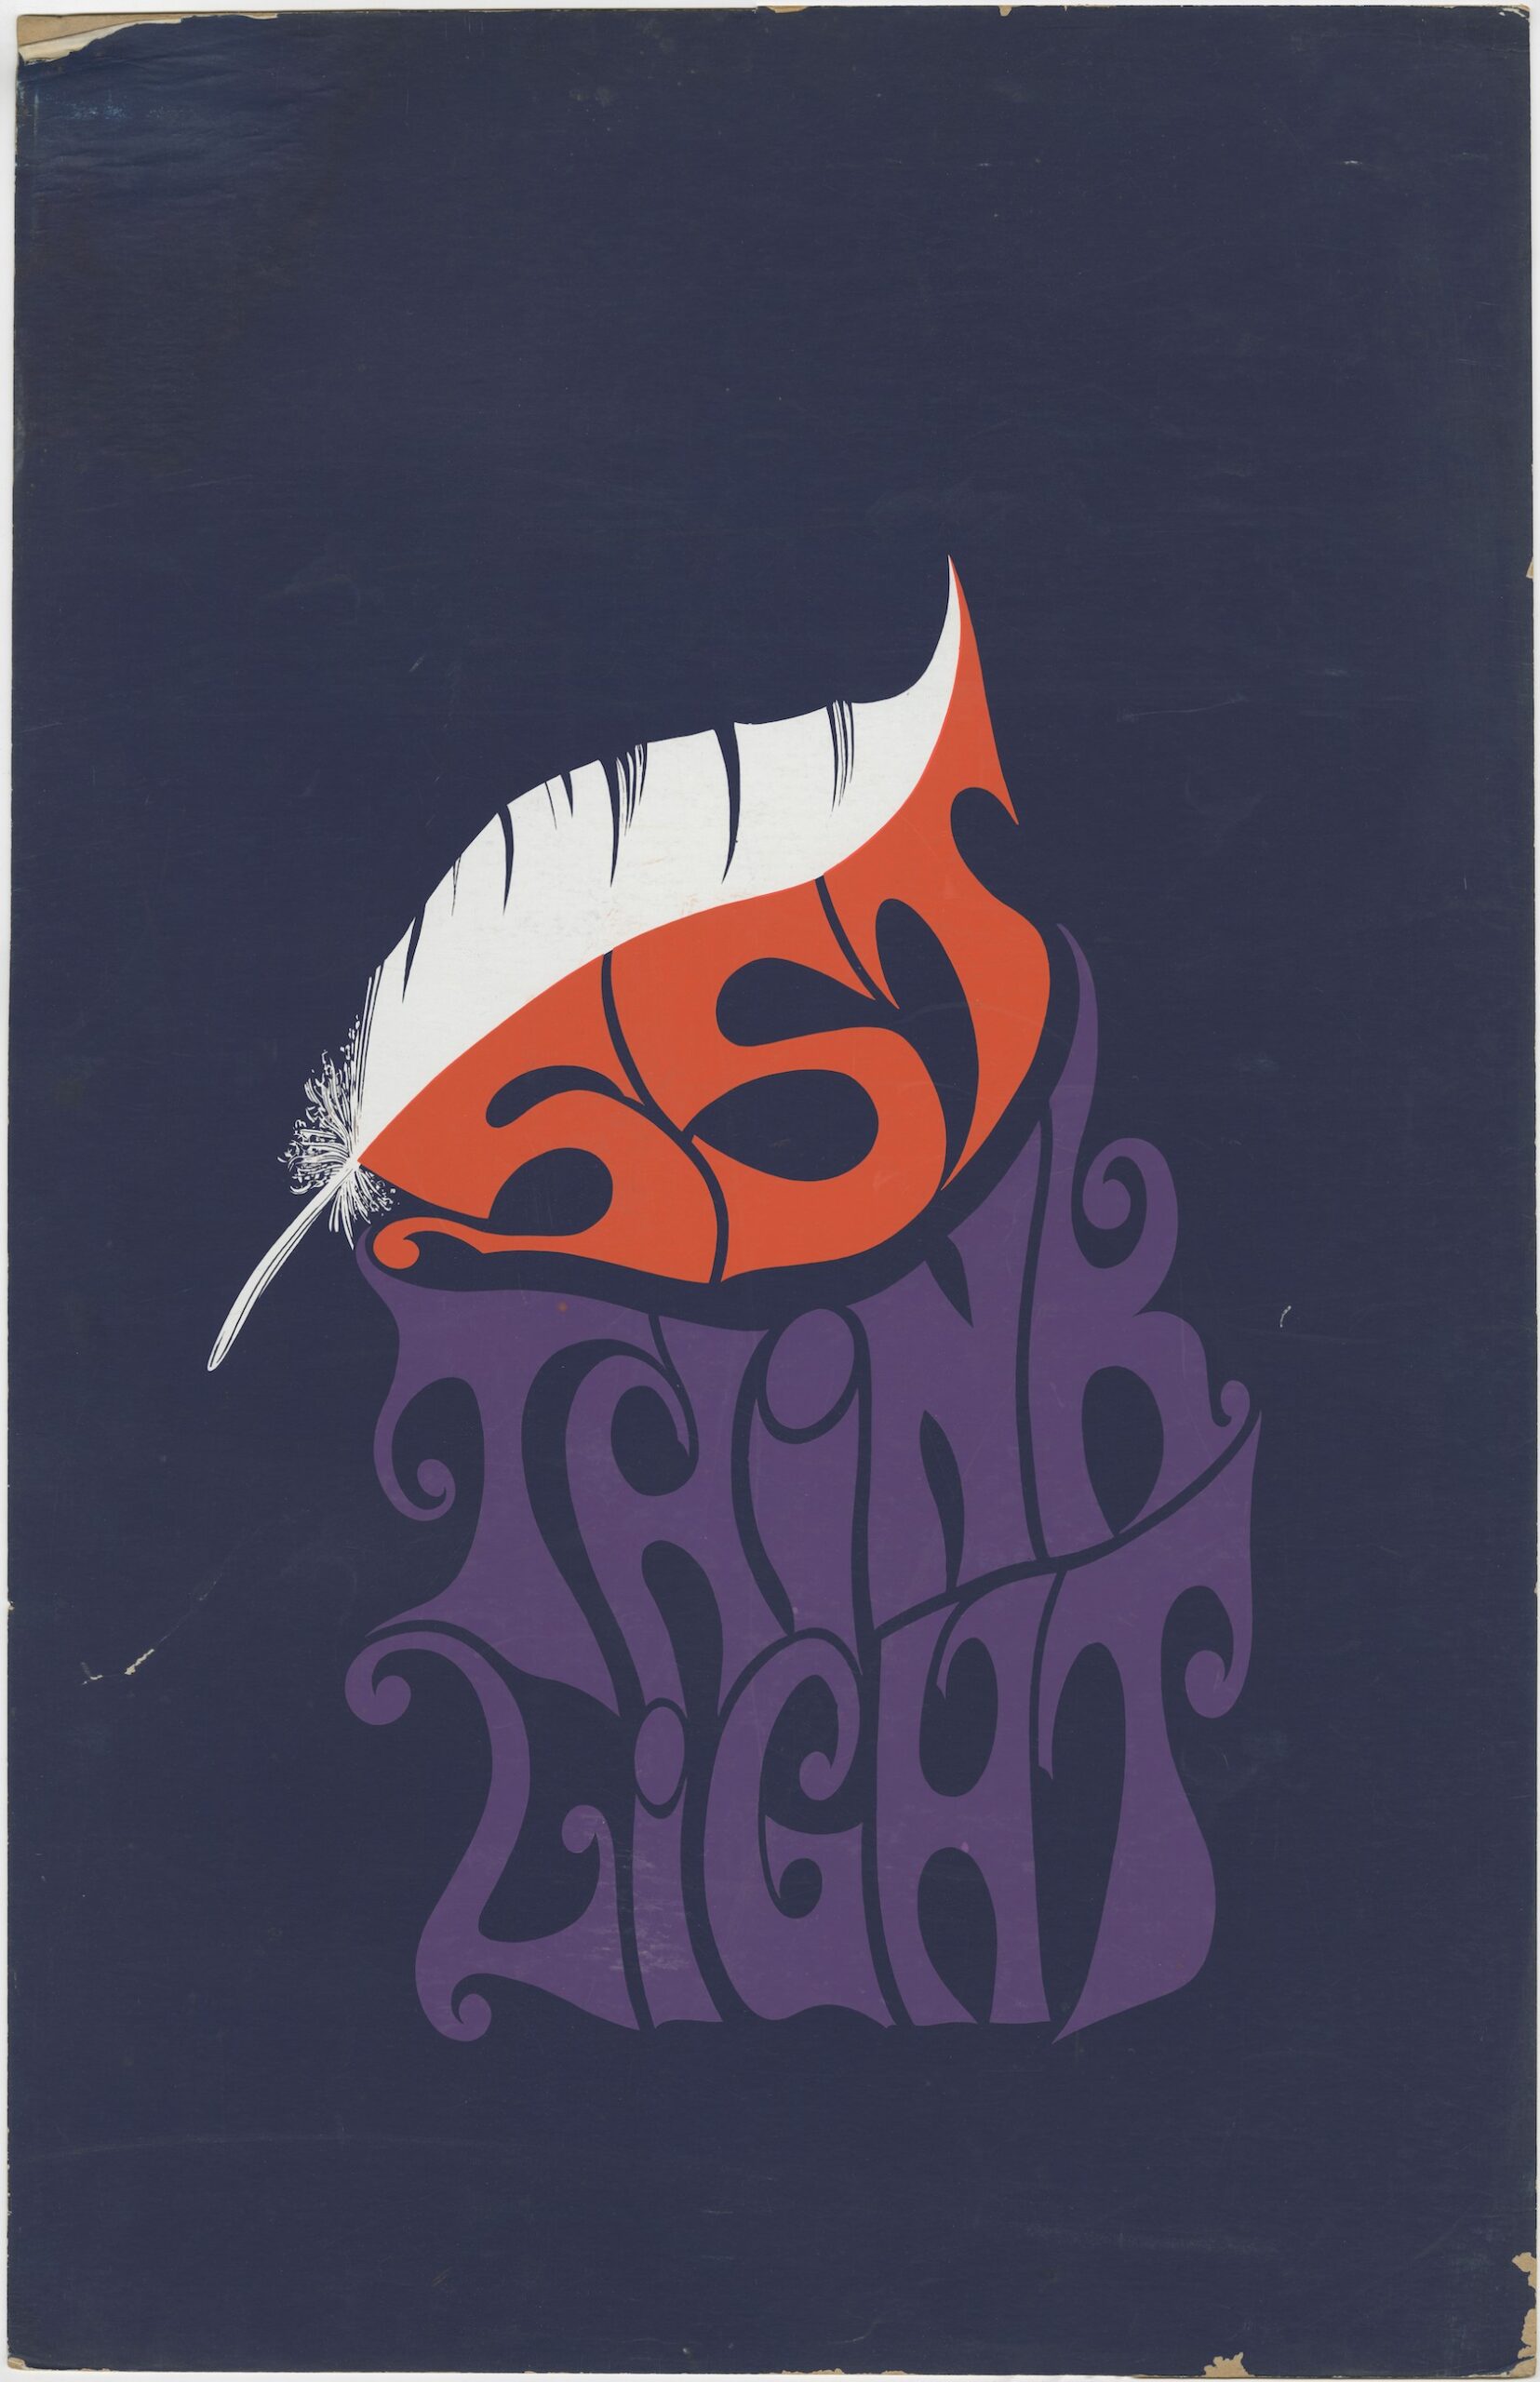 A dark purple poster with stylistic lettering reading "SST Think Light"